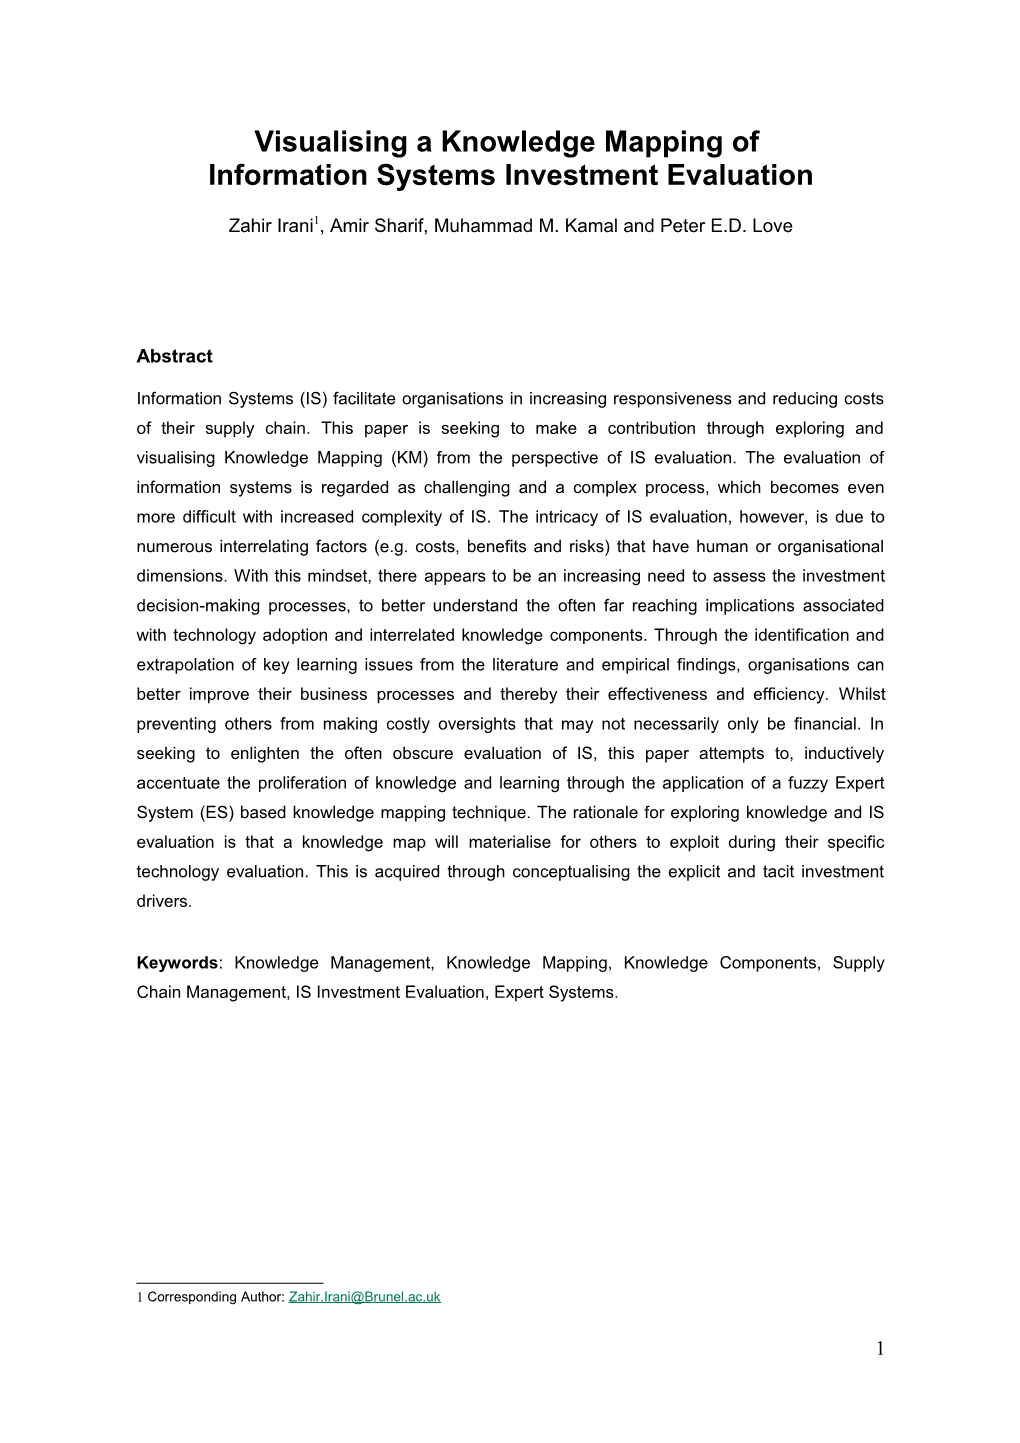 Knowledge Mapping for Information Systems Evaluation in Manufacturing